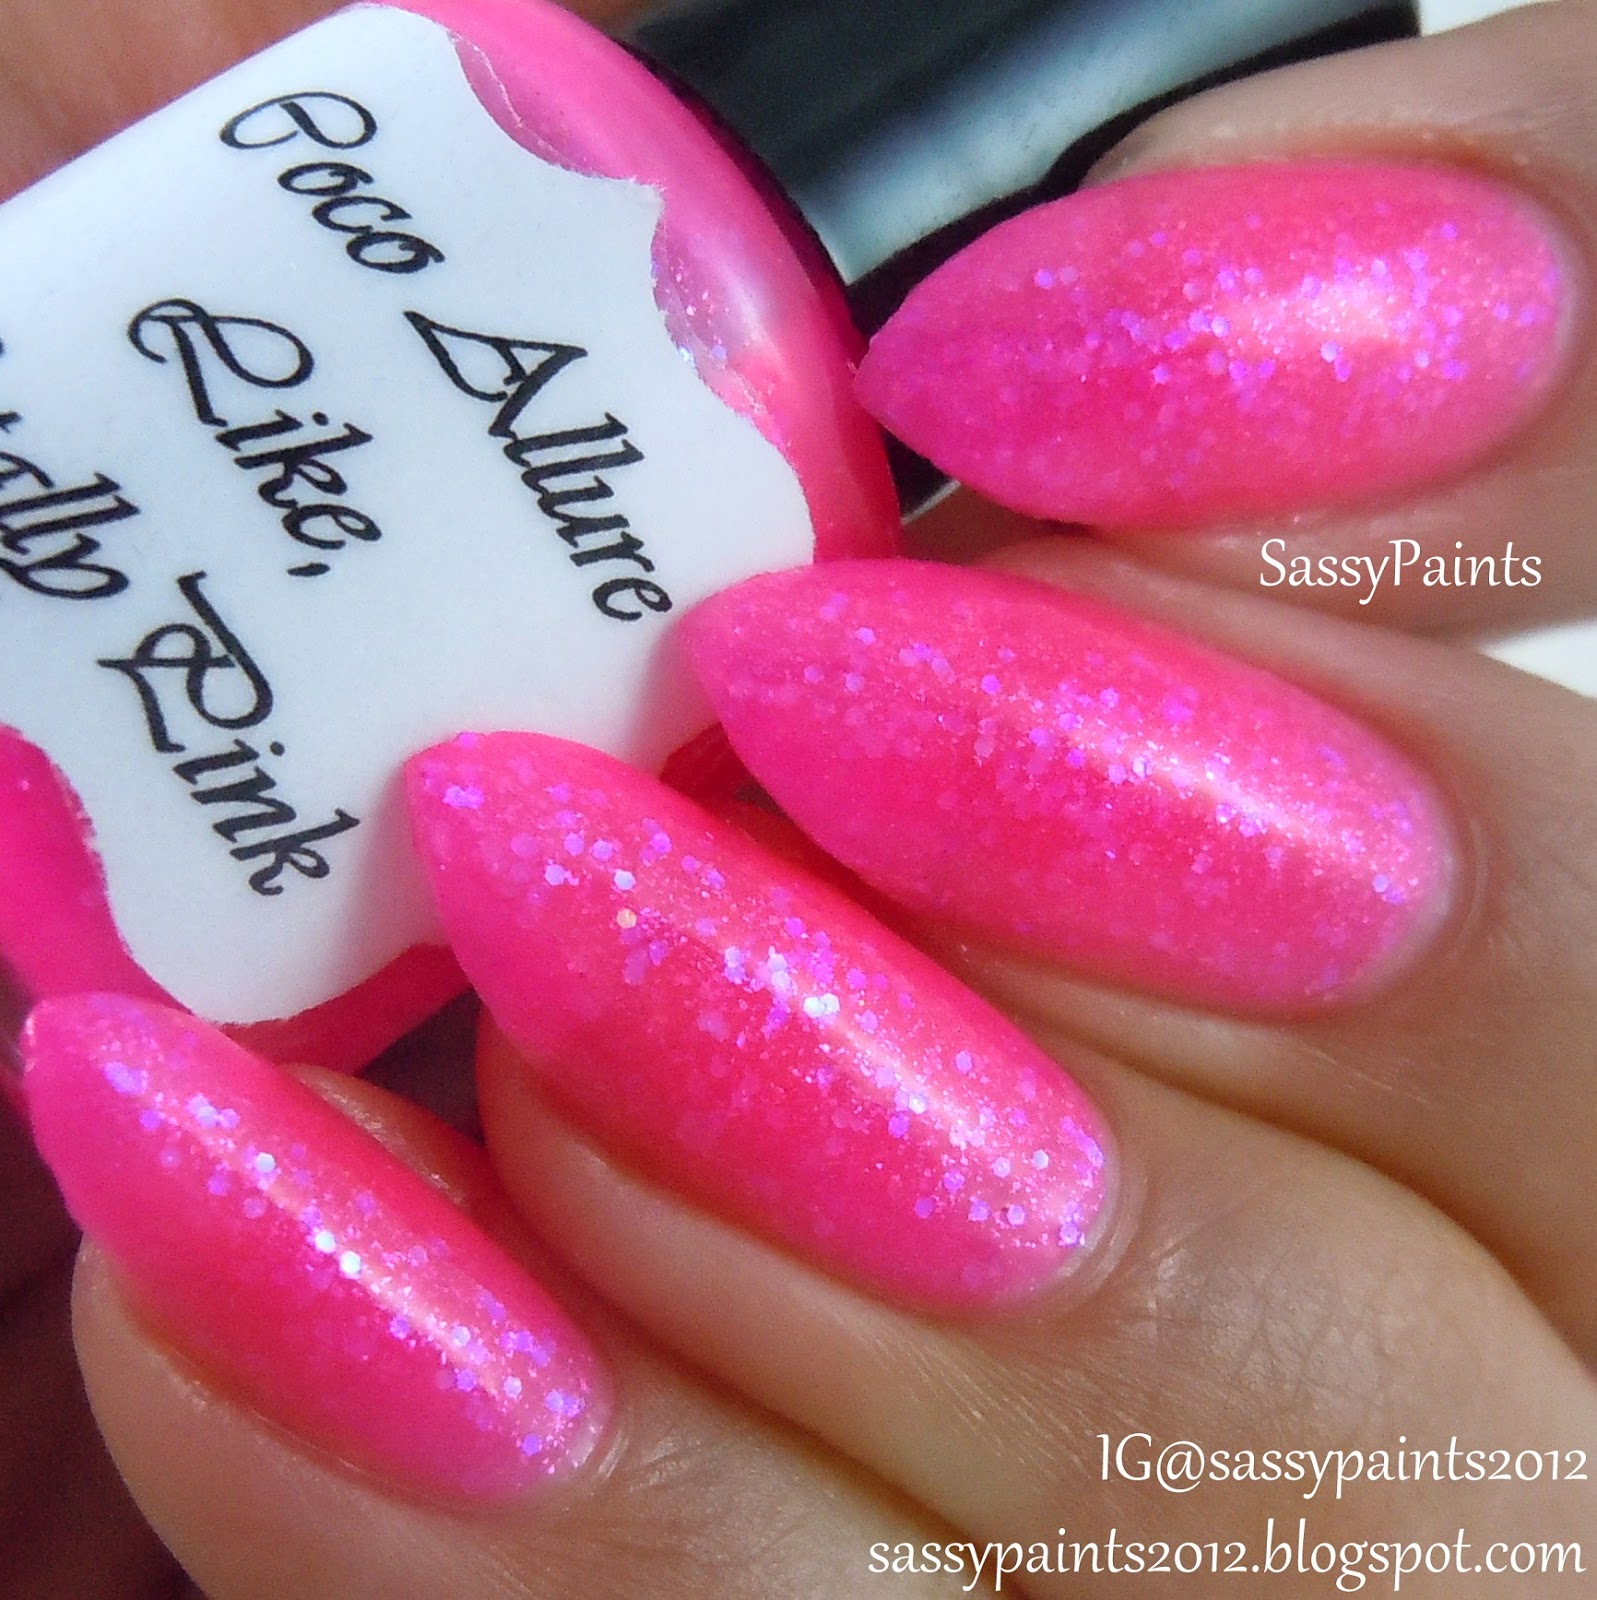 Sassy Paints: Coco Allure: Like, Totally Pink *Edited*